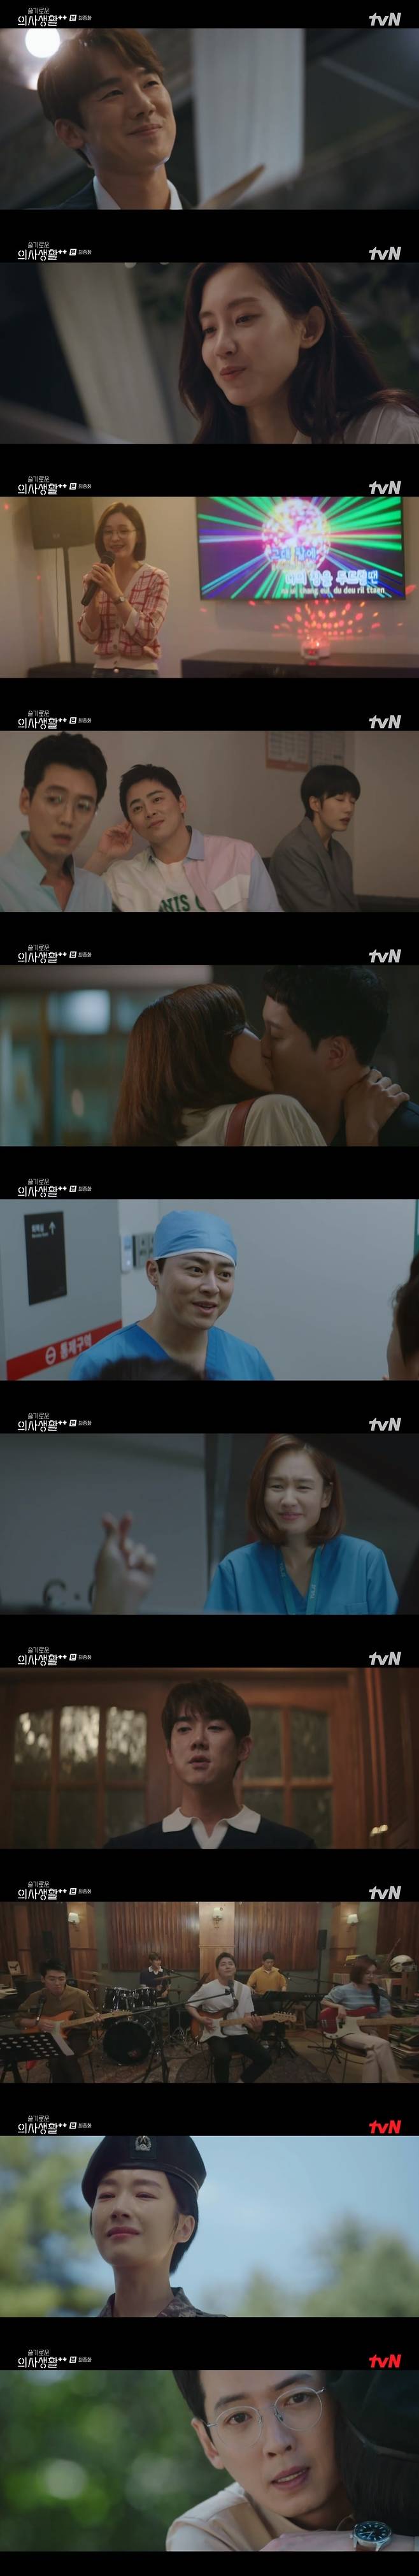 Seoul = = Suluisaeng 2 ended with Happy Endings.In the TVN Thursday afternoon drama Spicy Doctors Life Season 2 (Spicy Life 2), Ahn Jung-won (Yoo Yeon-Seok) and Shin Hyun-bin decided to study at United States of America.Kim Joon-wan (Jung Kyung-ho) will meet again with Lee Ik-sun (Kwak Sun-Young).Lee Ik-jun (Cho Jeong-seok) and Chae Song-hwa (Jeon Mi-do) who became lovers after turning around had a happier time together, and they also laughed as they tried to make love for the chickens in the hospital.Chae Song-hwa informed Yang Seok-hyung (Kim Dae-myung), who did not believe him, that he was dating Lee Ik-jun. Yang Seok-hyung also said he had serious meetings with Chu Min-ha (An Eun-jin).My mother wants to eat once, said Ahn Jung-won, who also raised love in the winter.An Jeong-won smiled happily when he said, I tell you my daughter loves you so she wants to eat right away.I was sorry to break up with Yang Seok-hyung. People are married because they do not want to break up. Yang Seok-hyung said, Do not you have to meet me more?I do not know how long my brother is, but I am old, Chu Min-ha said.Yang Seok-hyung approached with a lovely expression, and the two caused a nervous kiss.On this day, 99z, including Lee Ik-joon, An Jeong-won, Kim Joon-wan, Yang Seok-hyung and Chae Songhwa, all worked for patients in the hospital.I was tired of the difficult surgery in an emergency, but I encouraged each other and overcome it.Among them, Ahn declared that he would like to learn more about his majors and would leave for the United States of America for a year.Ahn Jung-won said, I want to study more transplantation, I think I can not go now or I will regret it later.Friends were sorry, but they understood his mind.Kim Joon-wan visited Lee Ik-suns unit. Lee Ik-sun, who ran out, asked Carefully, Youre not here to see me?Kim Joon-wan said, No, and replied, Im here to eat radish. Lee Ik-sun wept. Kim Joon-wan quietly embraced him and confirmed each others hearts.Since then, 99s, who worked at the hospital, looked at one place because the sky was beautiful. When Chae Songhwa said, I did not know when I was a child, it is very beautiful.Its time to go home, its good because I can go home, he said.